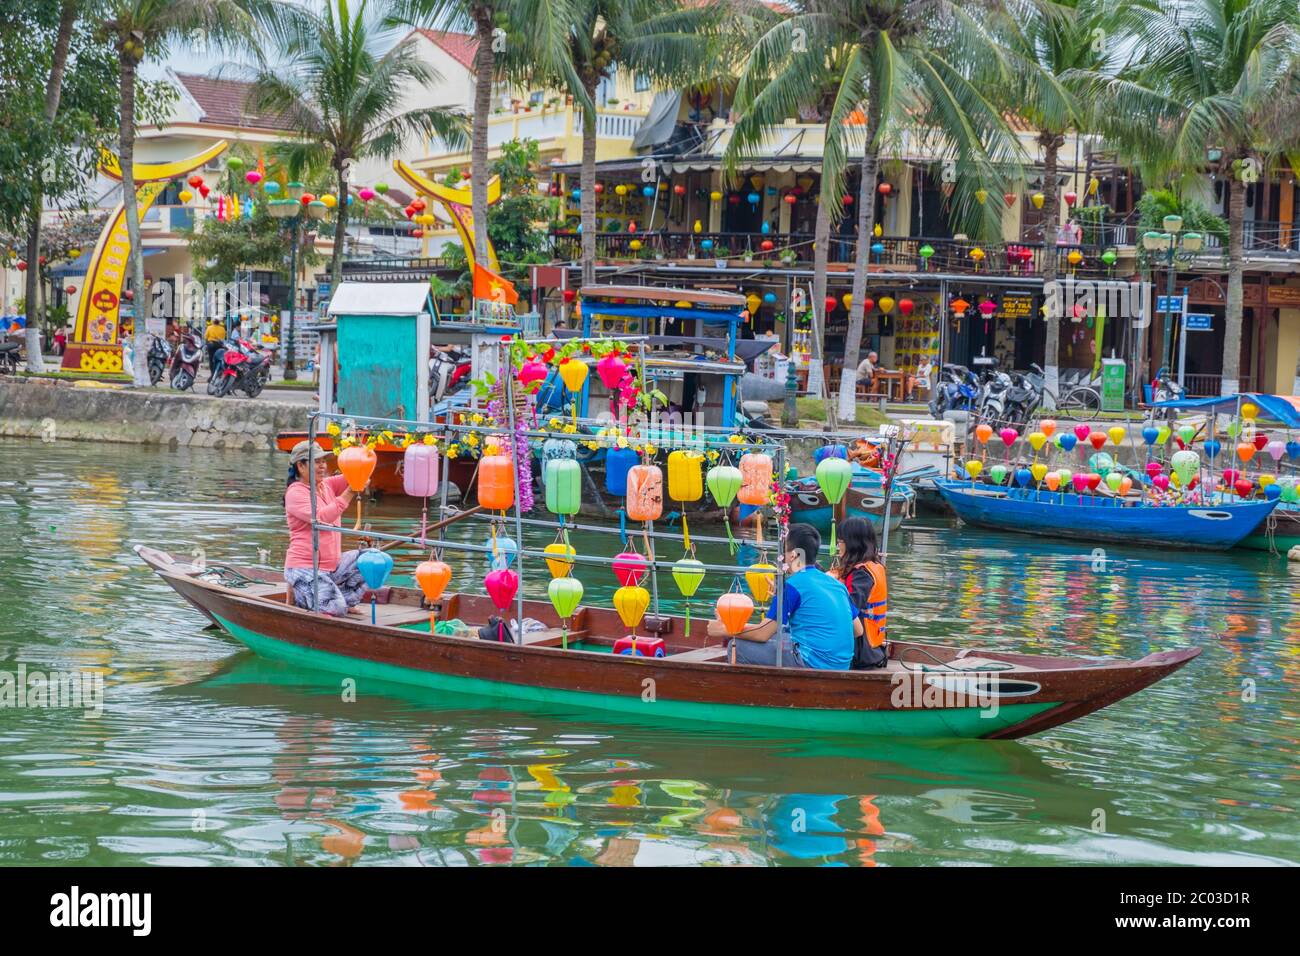 Traditional old town river boat ride, Thu Bon River, Hoi An, Vietnam, Asia Stock Photo